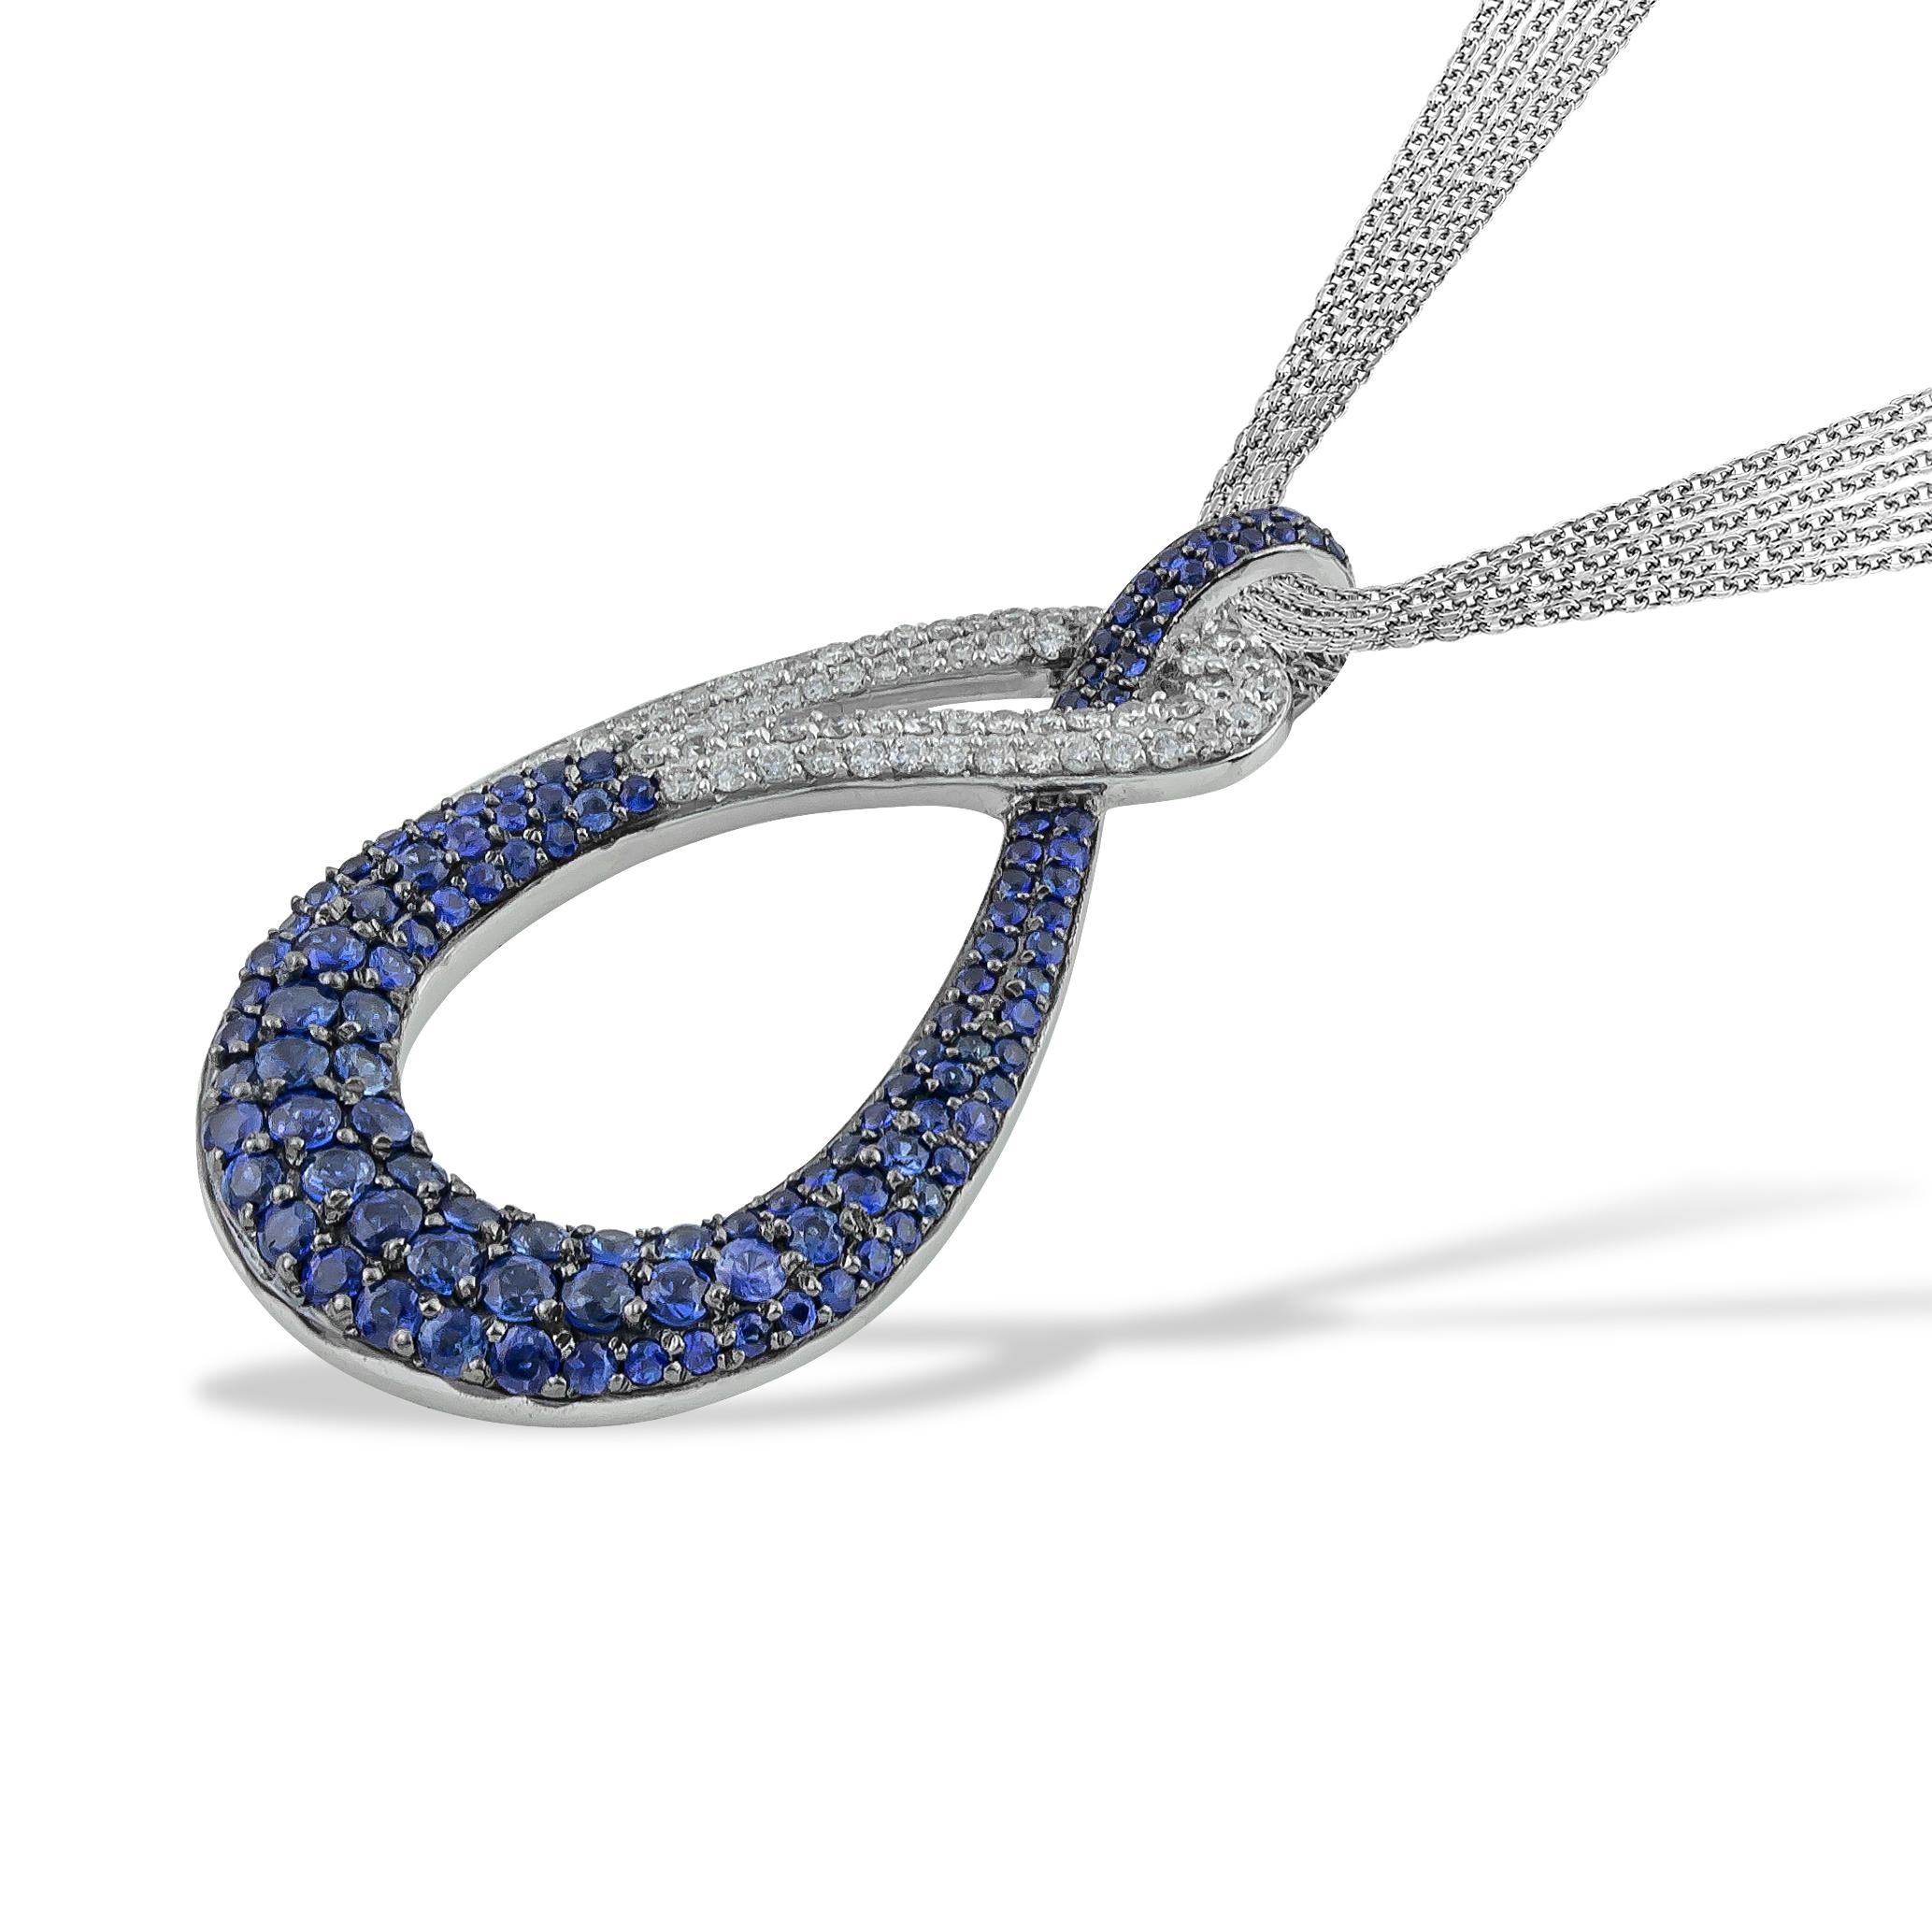 Swan Blue Pave Sapphires and Diamonds Pendant Necklace in 18kt White Gold. This blue sapphire organic shape necklace comes with Multi Chain ( x4 diamond cut rolo chain) . This necklace belongs to 